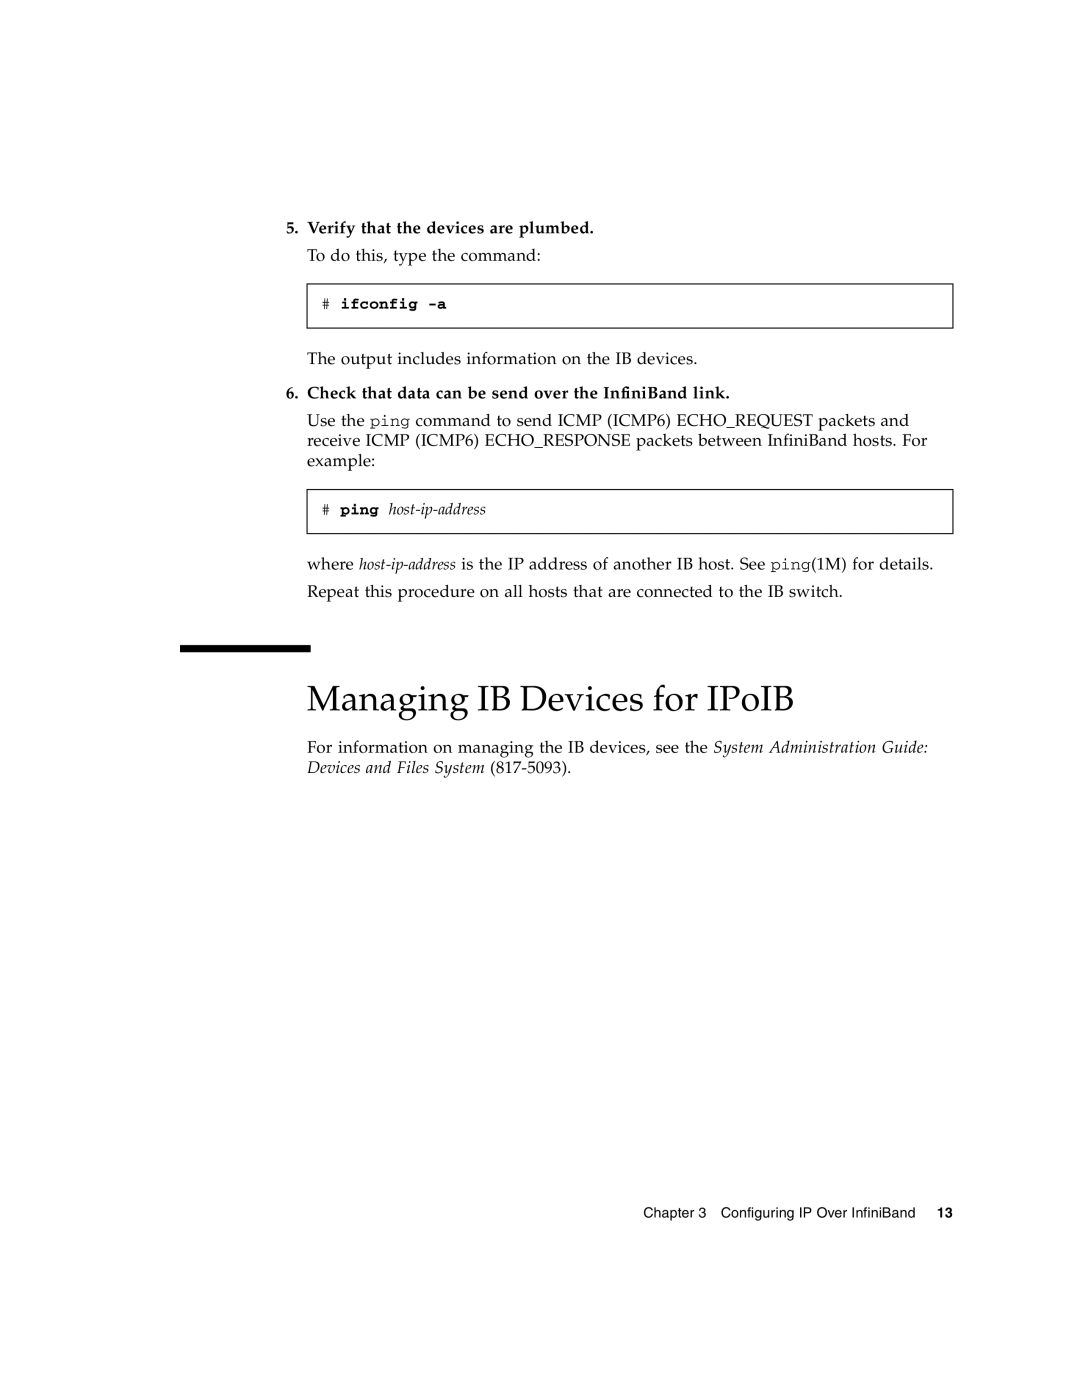 Sun Microsystems PCI Managing IB Devices for IPoIB, Verify that the devices are plumbed. To do this, type the command 